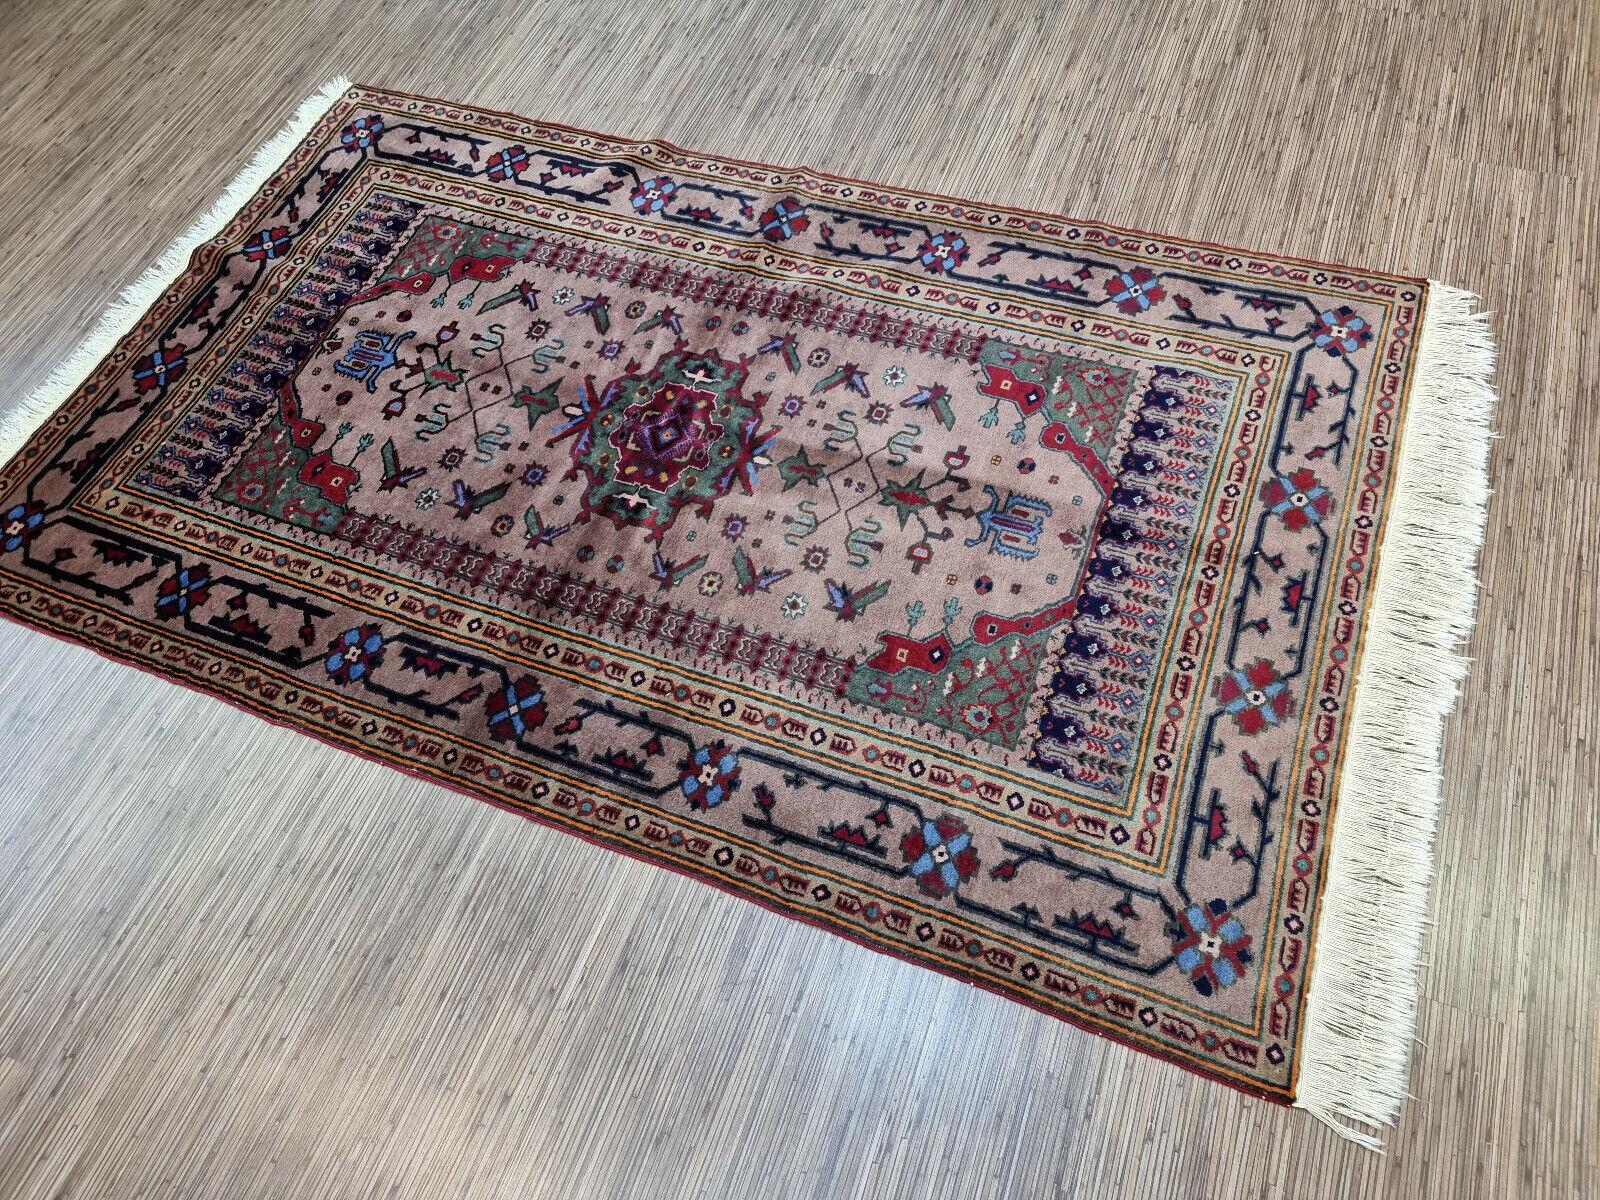 Handmade Vintage Caucasian Shirvan Rug

Enhance your home with this handmade vintage Caucasian Shirvan rug, a piece that combines history and artistry. This stunning piece measures 4’ x 6.6’ or 124cm x 204cm, making it a medium-sized rug suitable